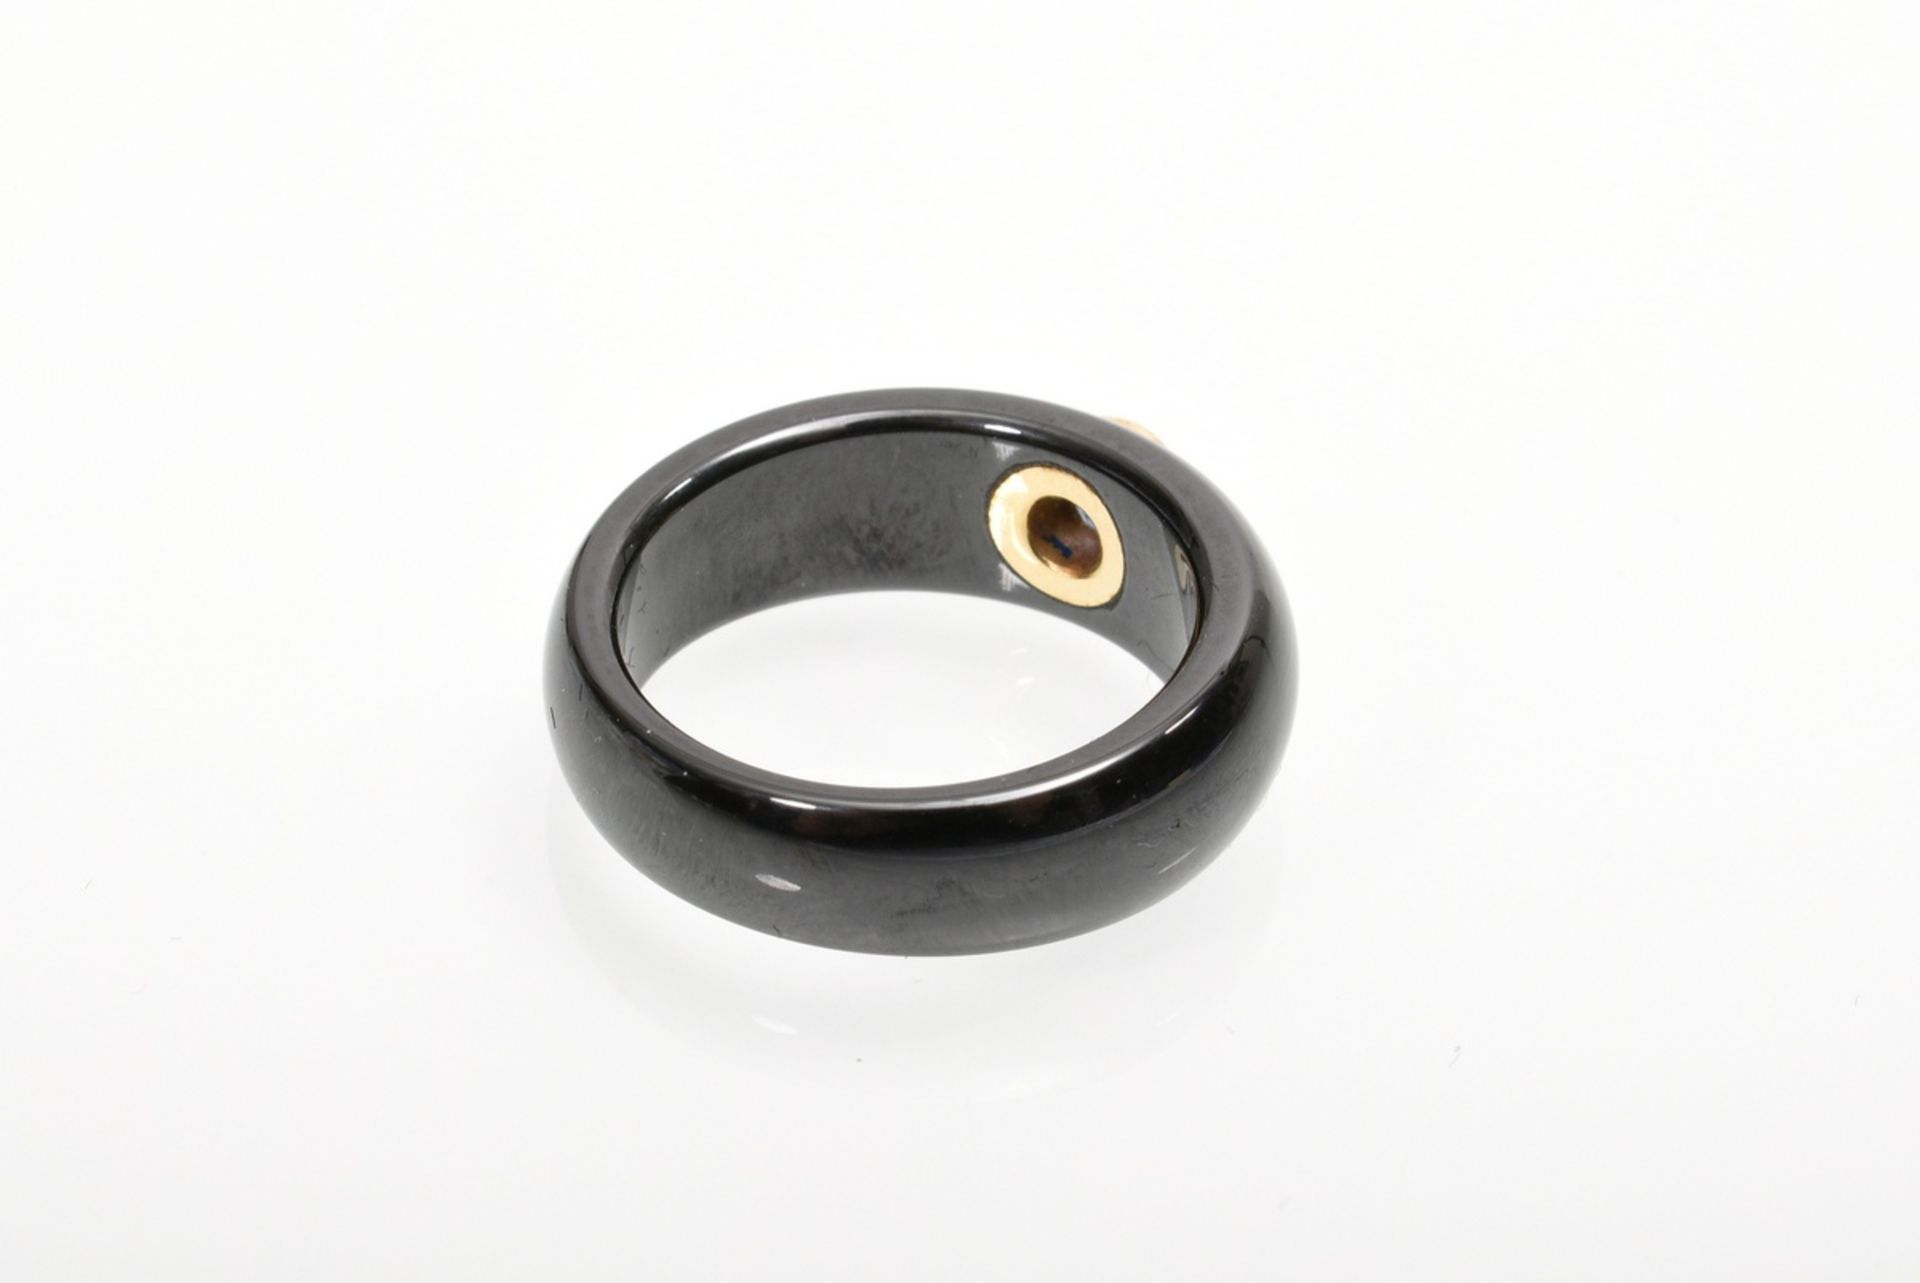 Carbon ring with polished surface and set sapphire in yellow gold 750 bezel setting, 6g, size 54 - Image 4 of 4